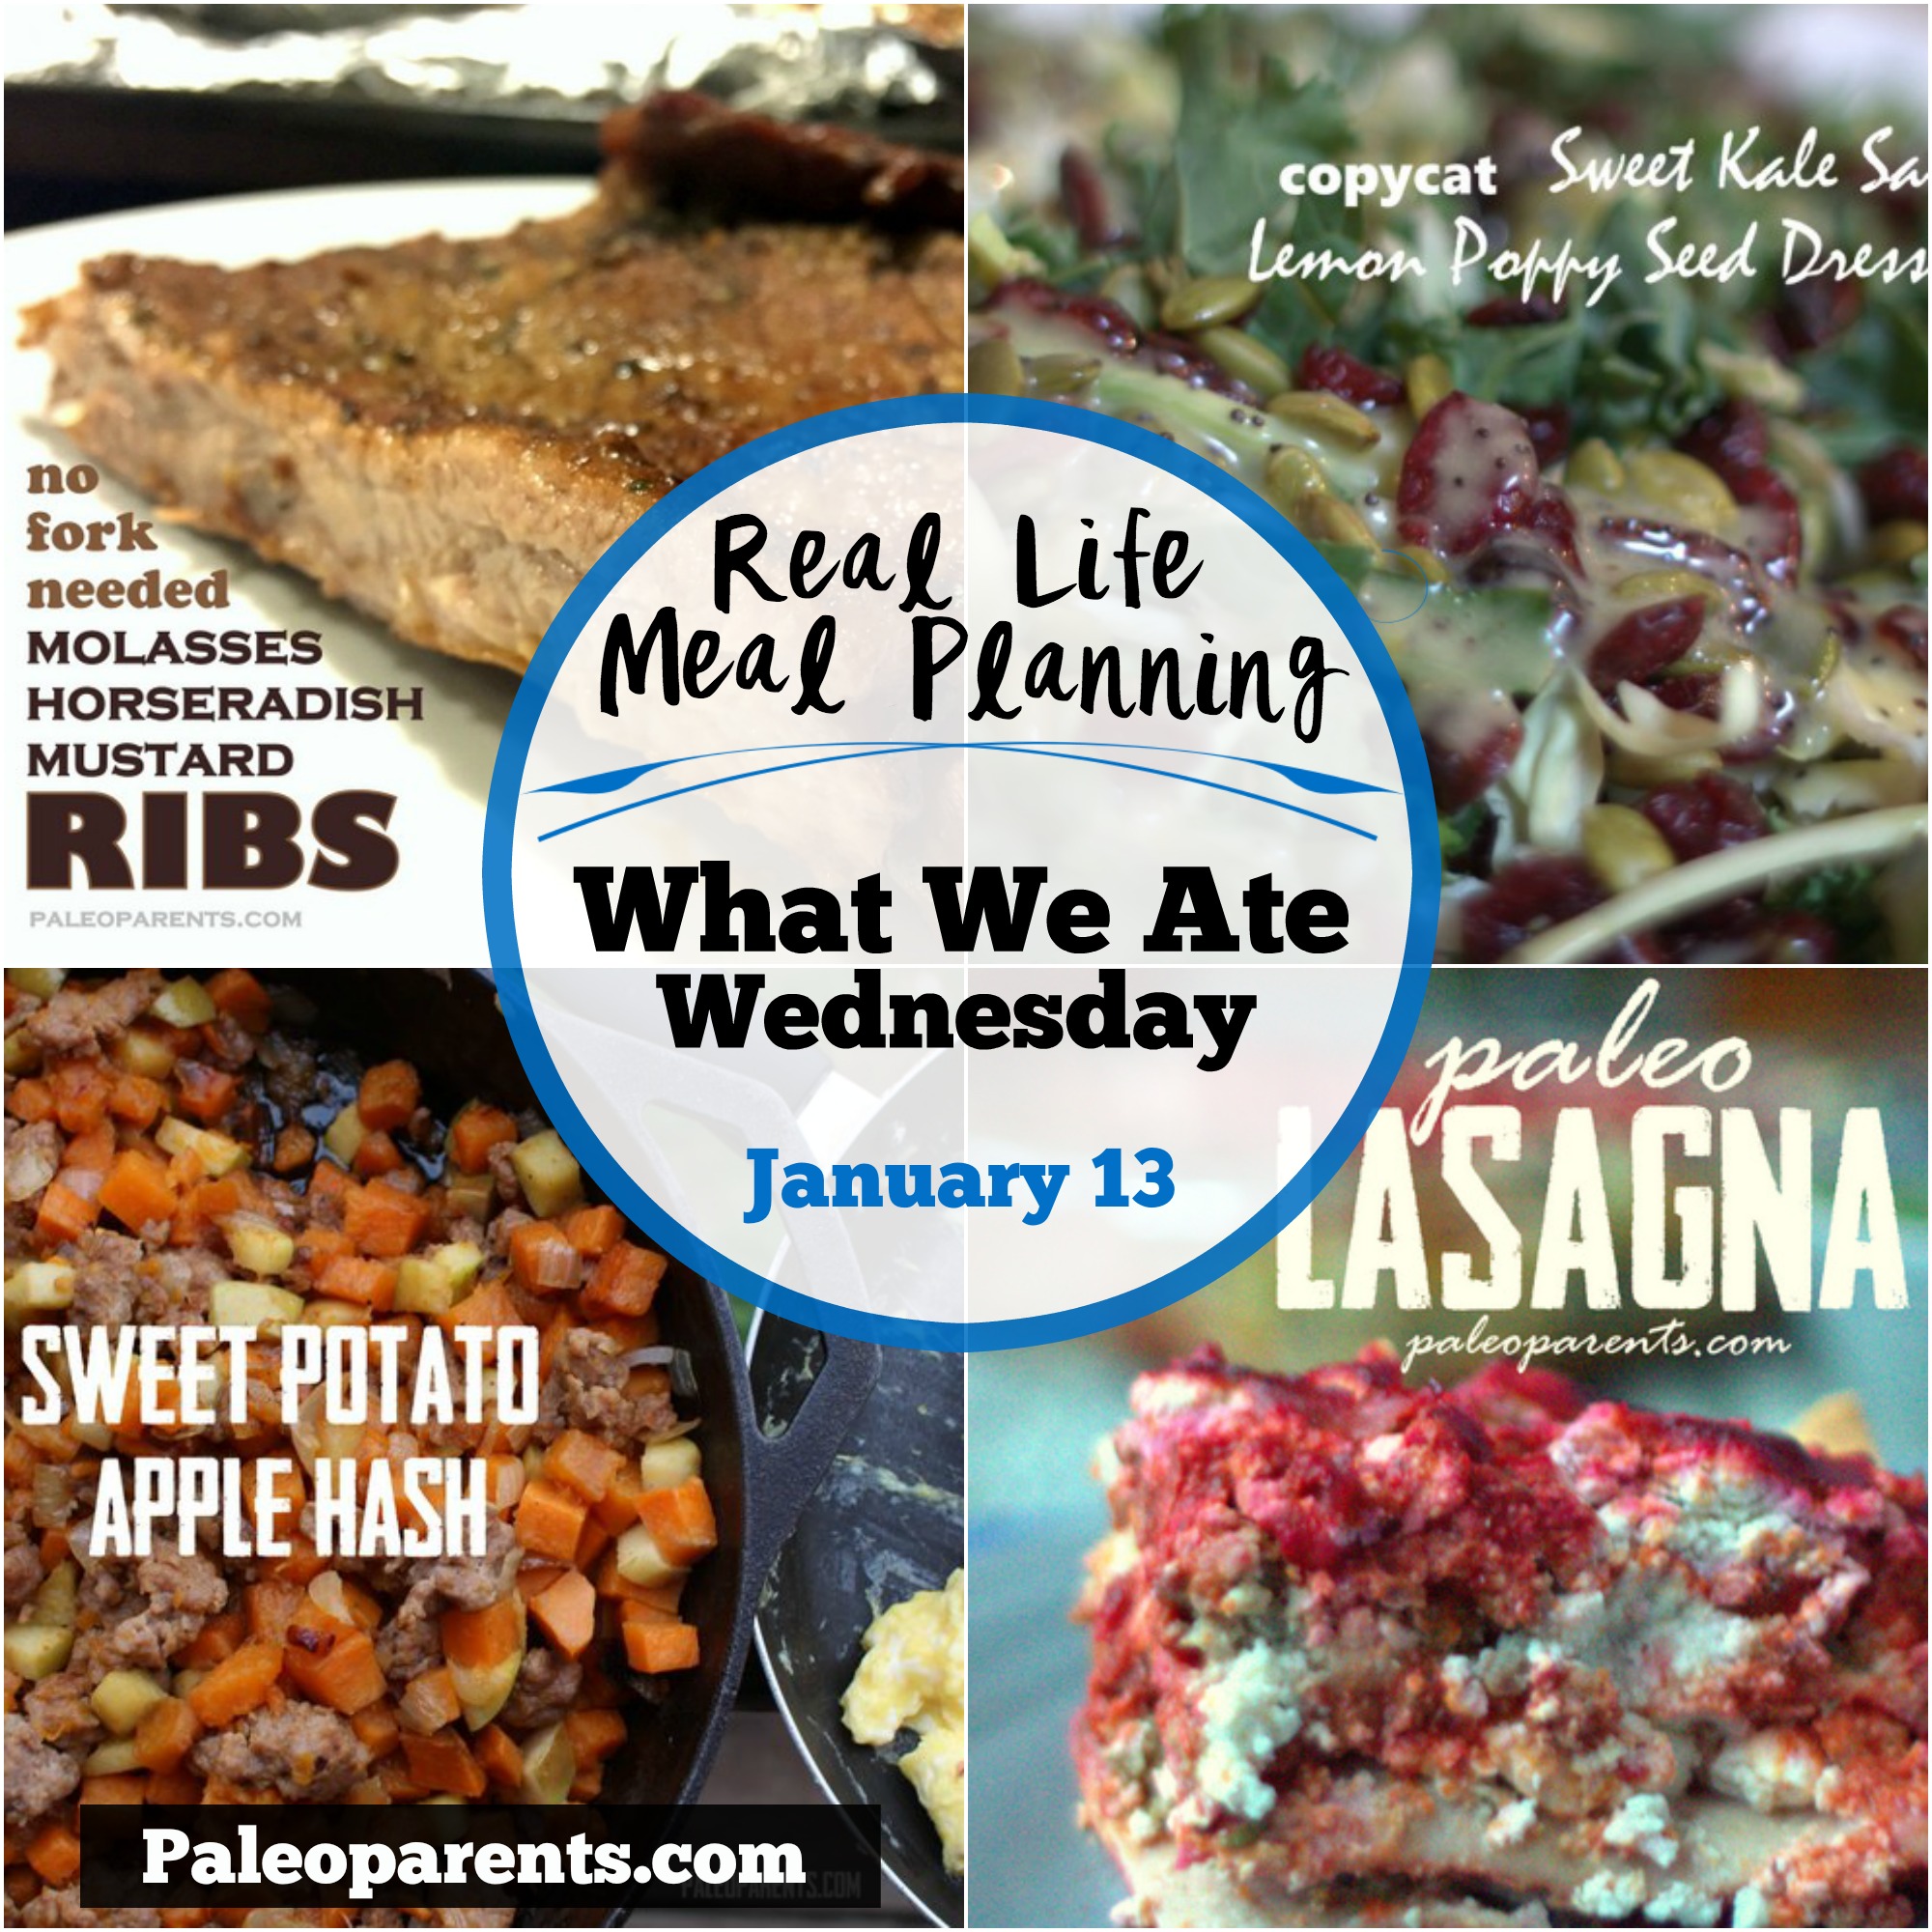 Real Life Meal Planning: What We Ate Wednesday January 13